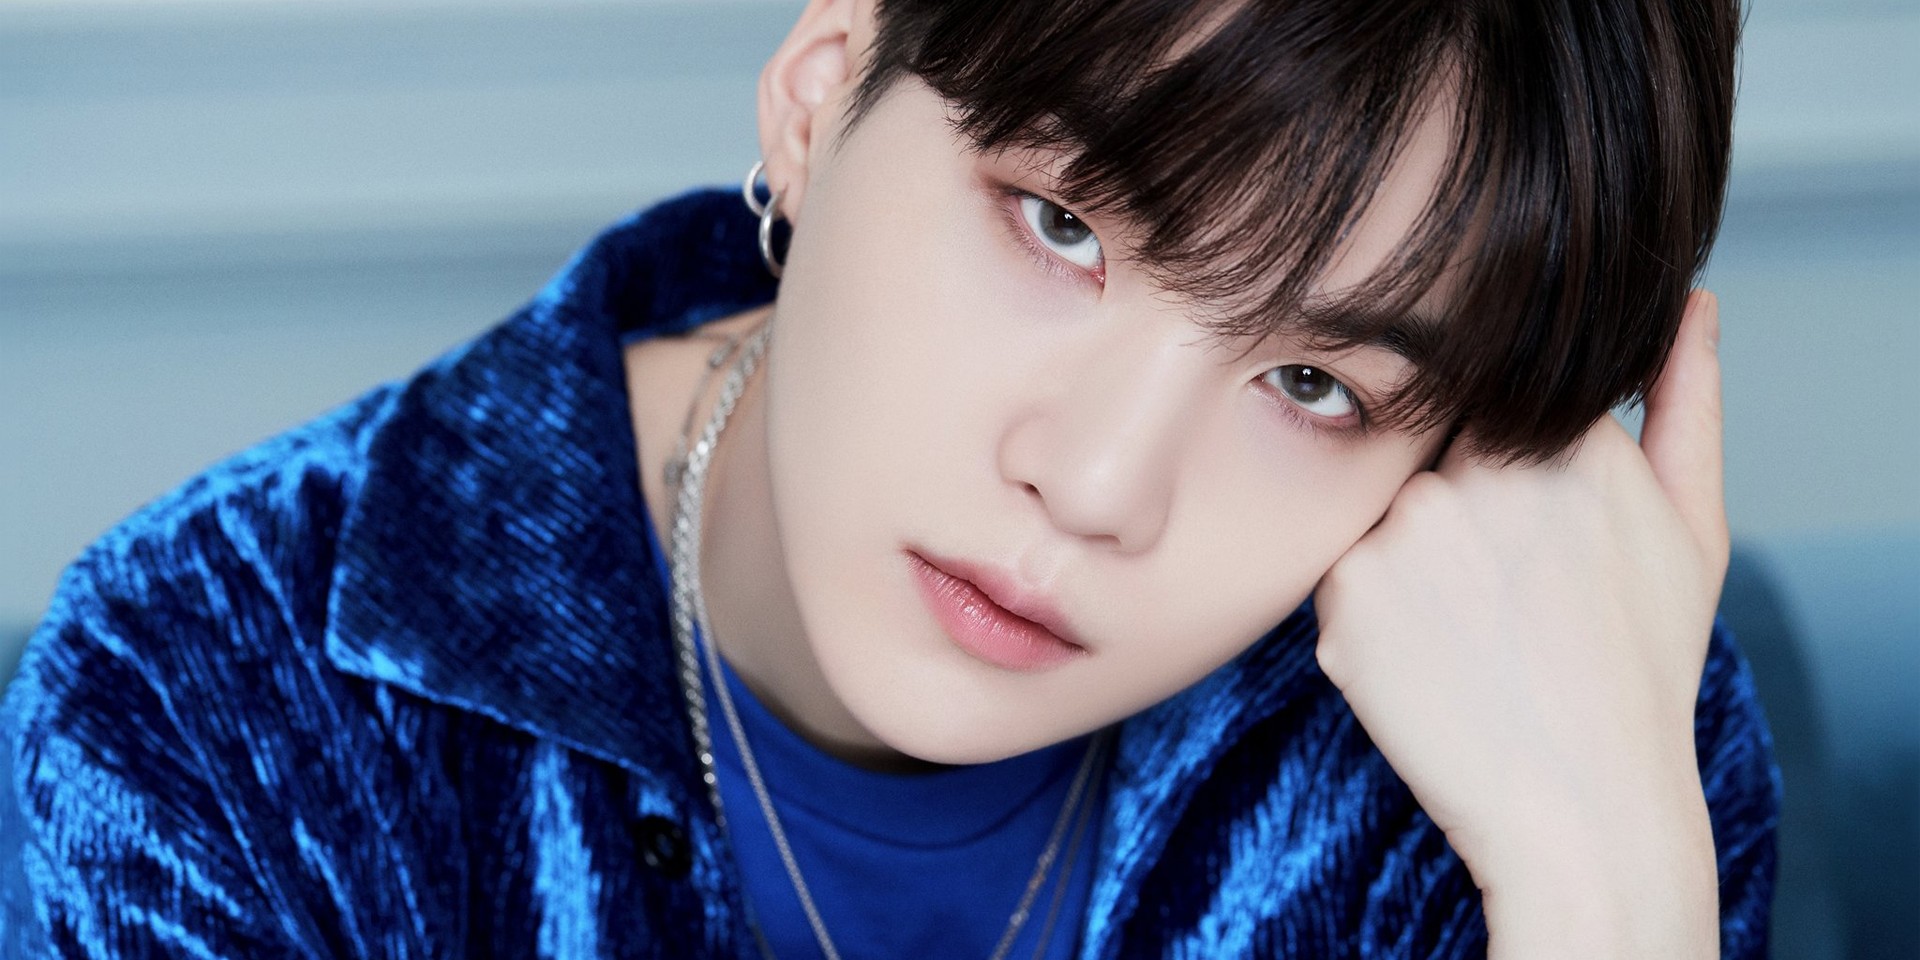 BTS' Suga celebrates 28th birthday with donation to children with cancer, inspires fans to start charity efforts